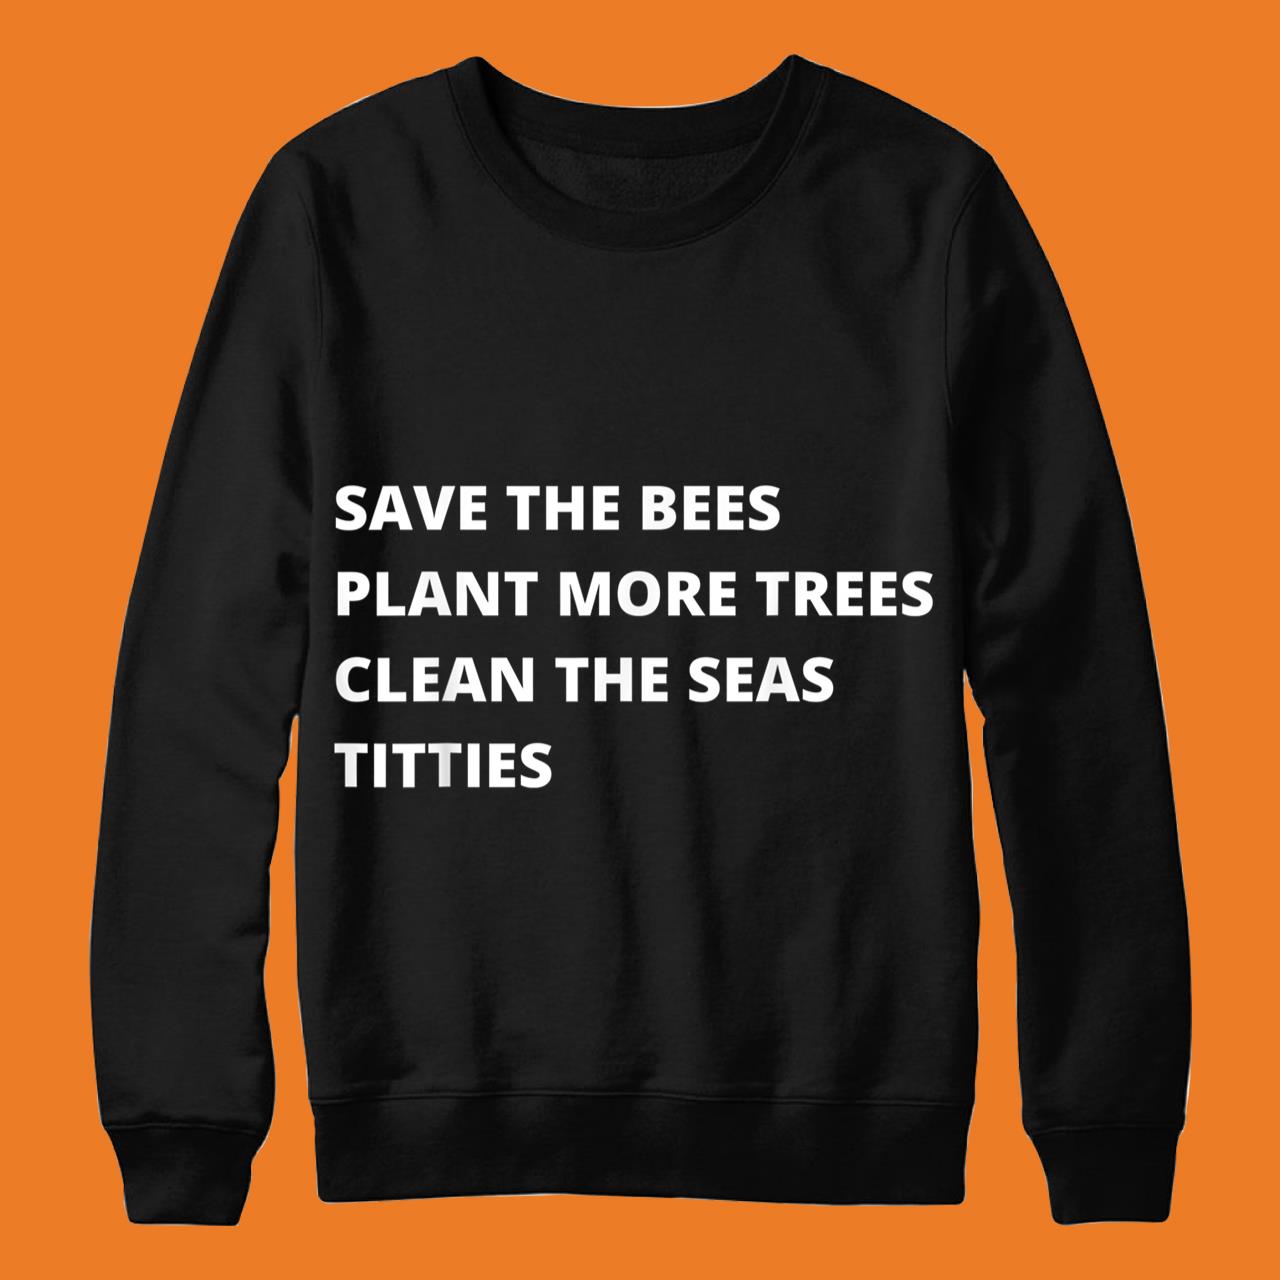 Save The Bees Plant More Trees Clean The Seas Titties Tee Shirt